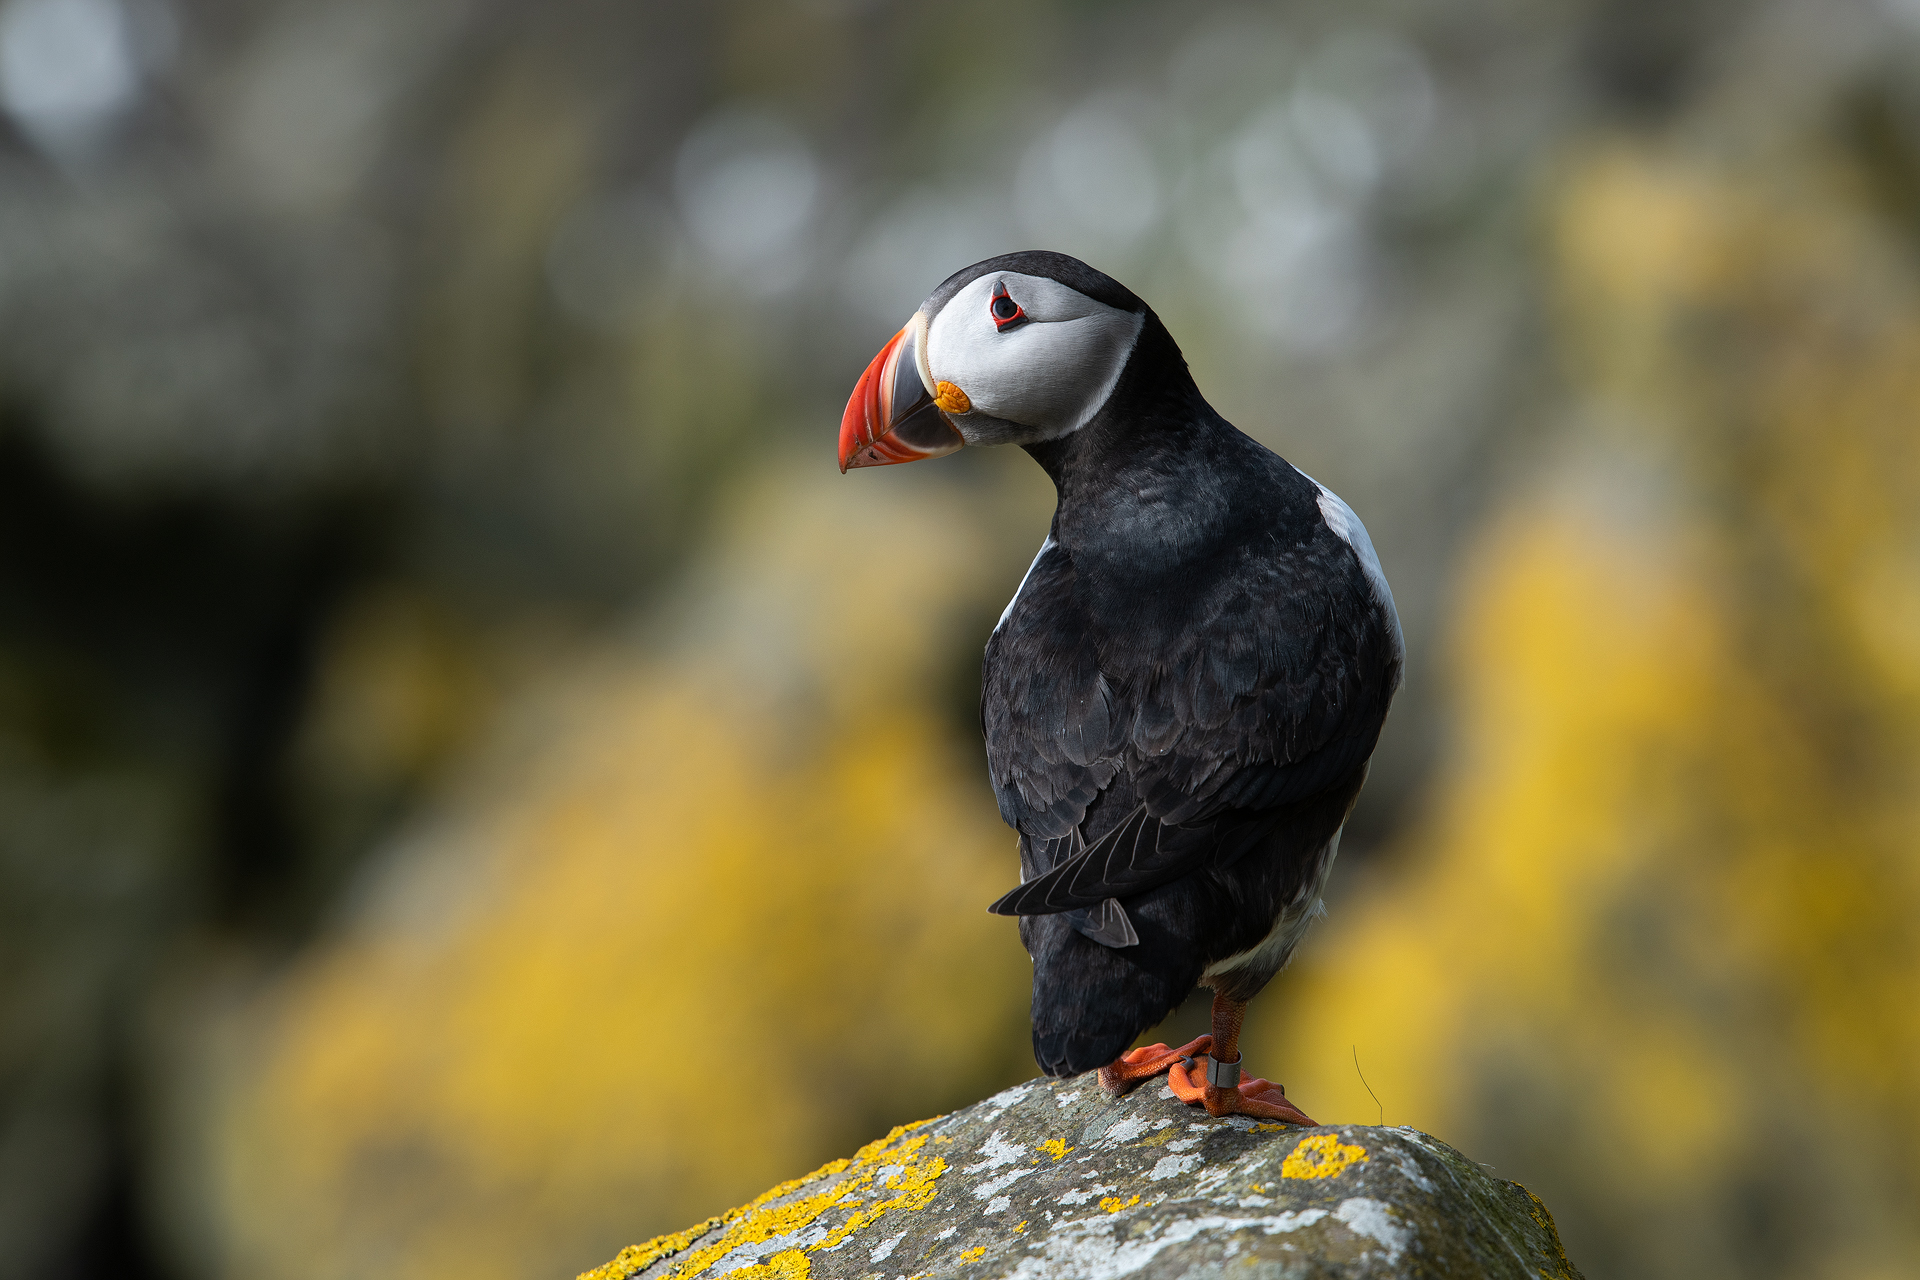 Looking back – Puffin Therapy